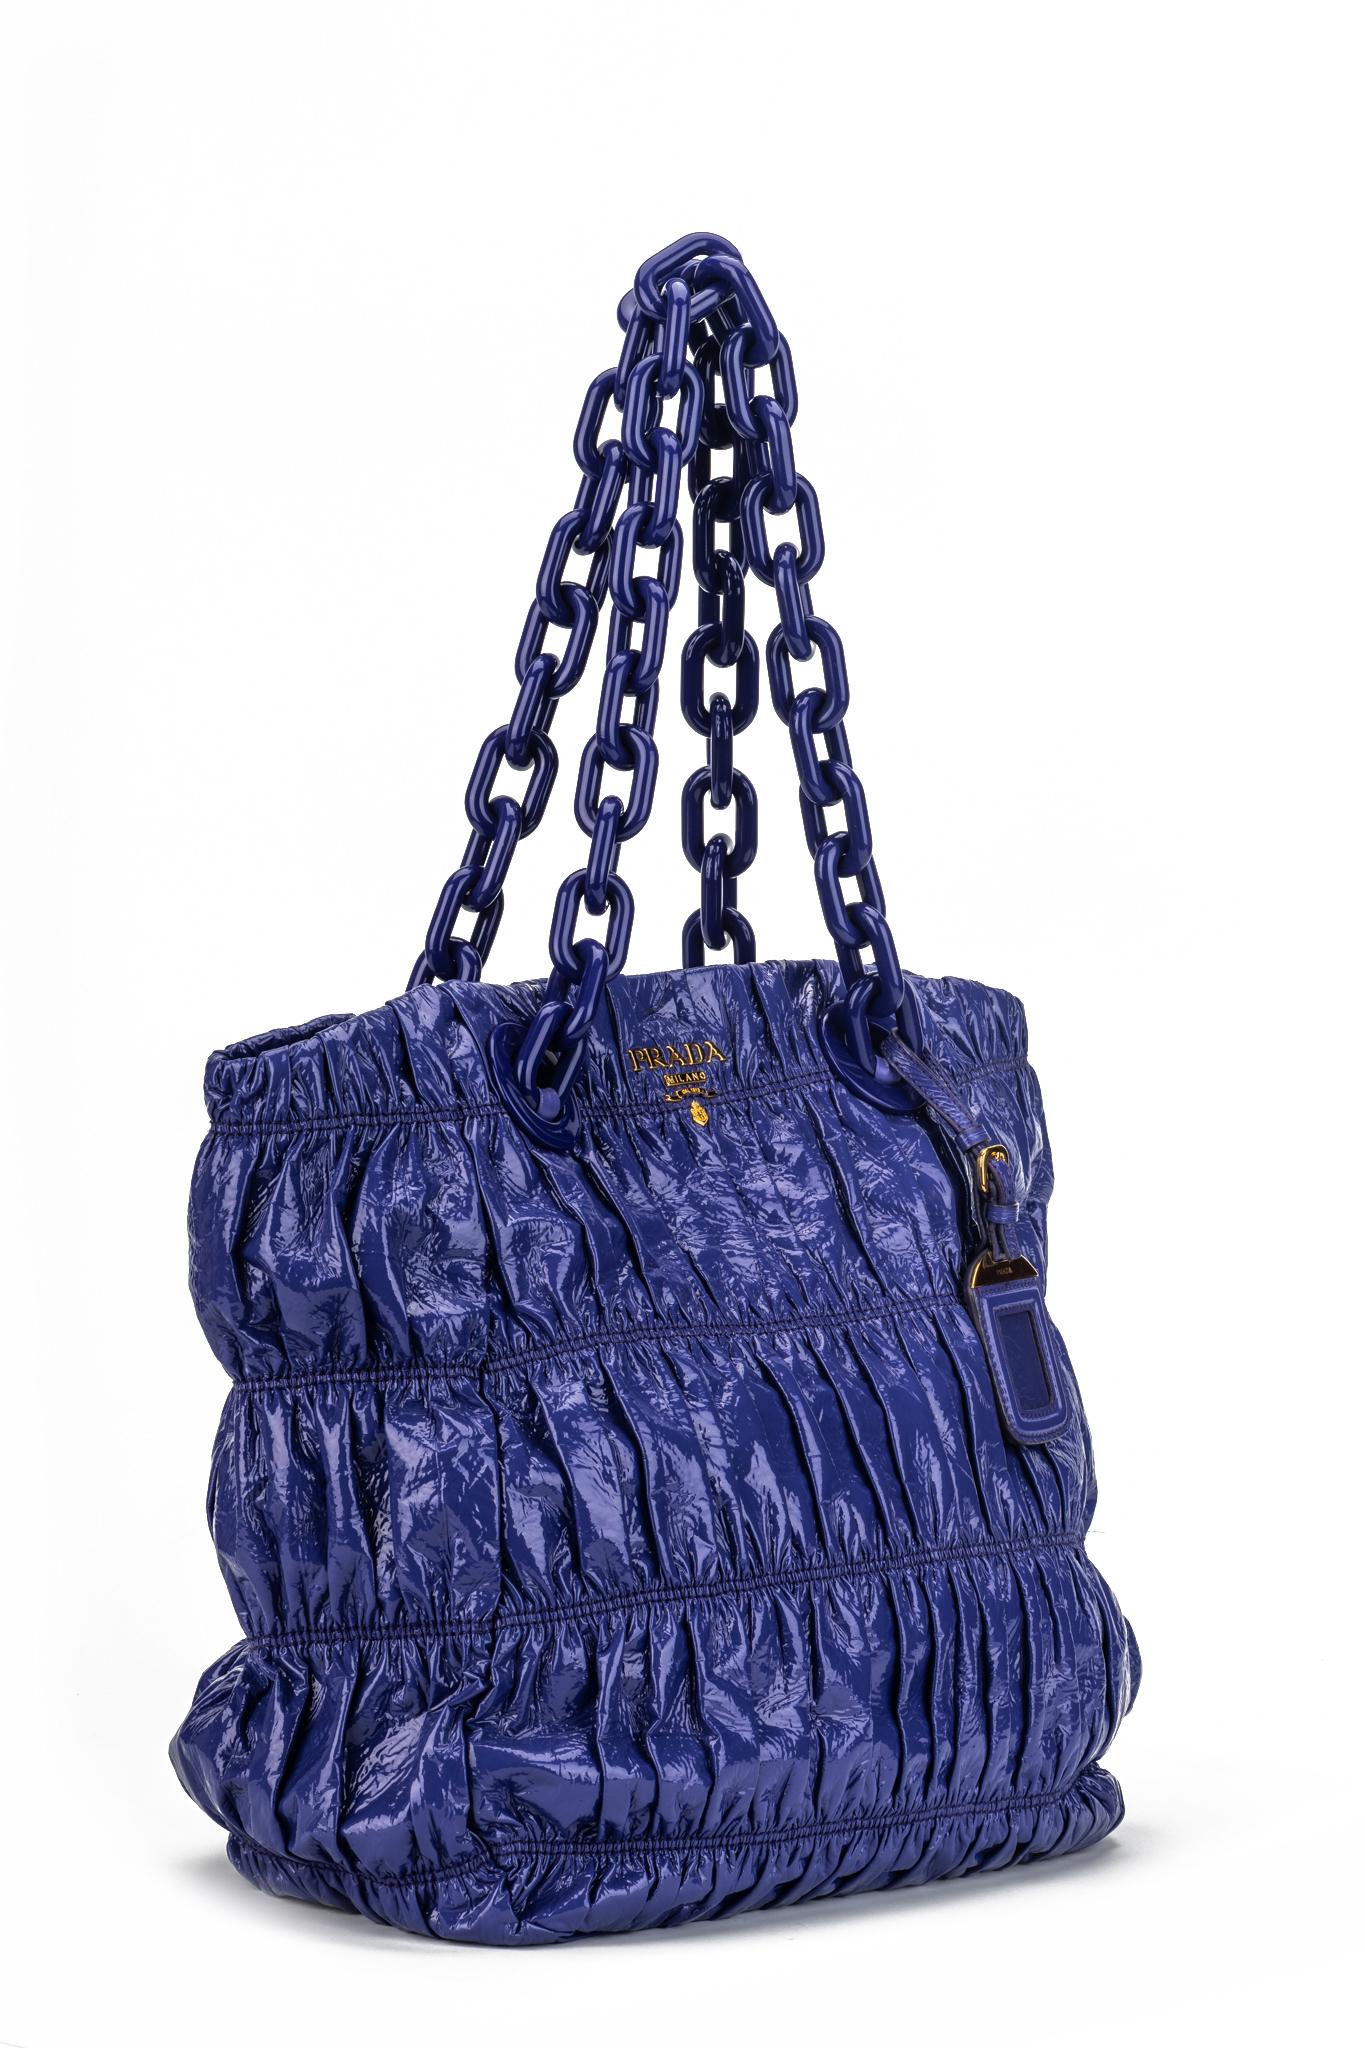 New Prada Purple Rouched Patent Tote Bag In New Condition For Sale In West Hollywood, CA